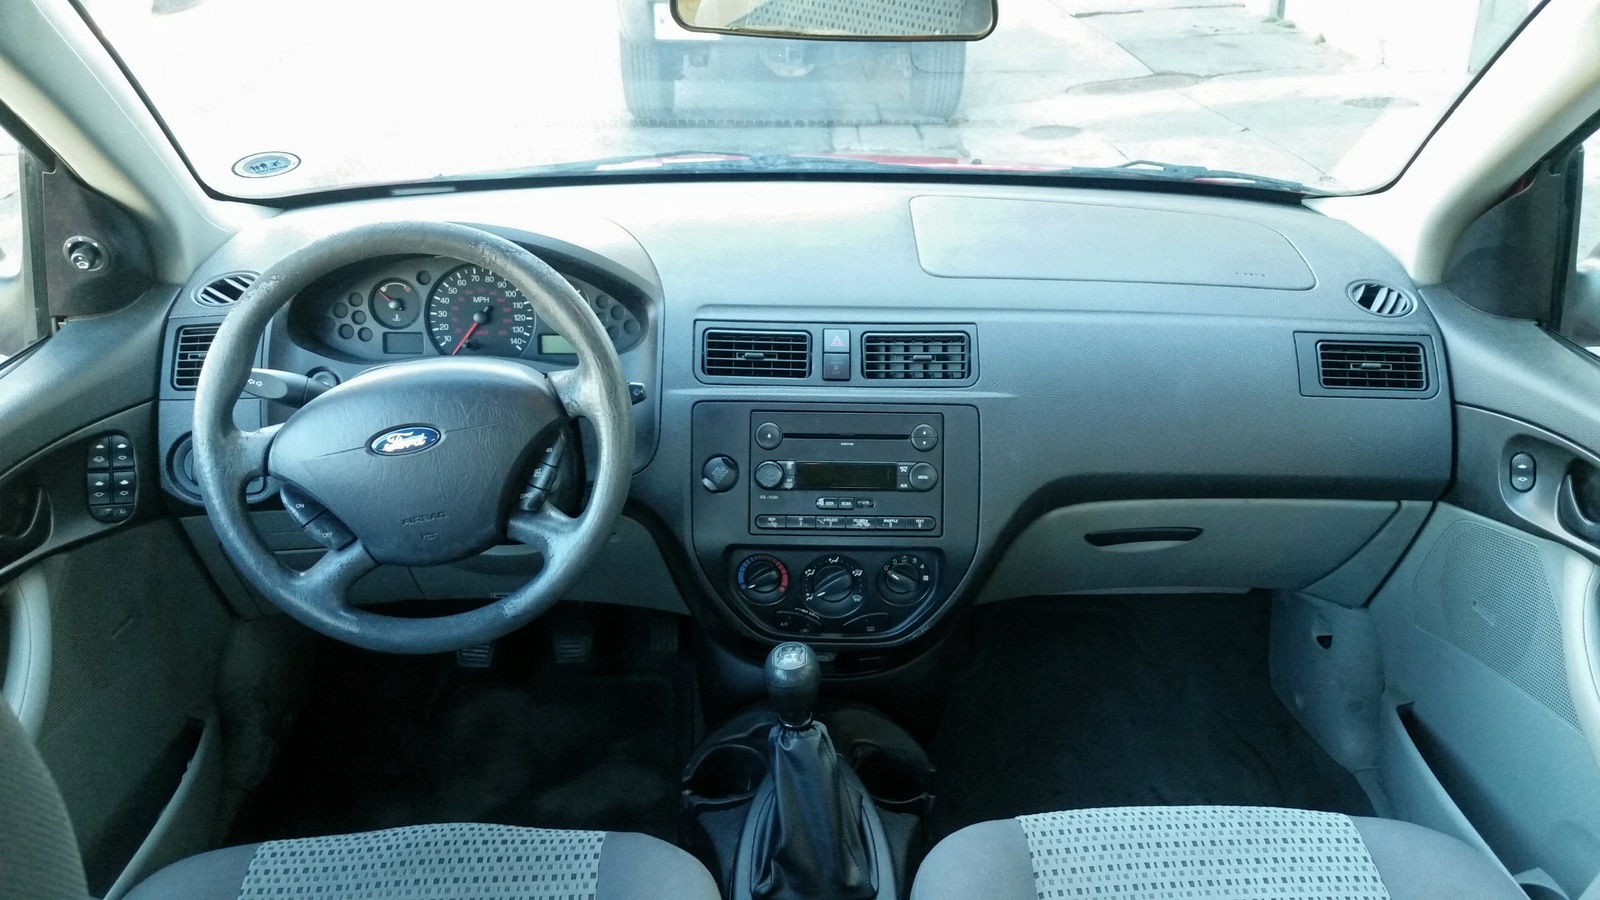 2007 Ford Focus4 Cyl Values  JD Power